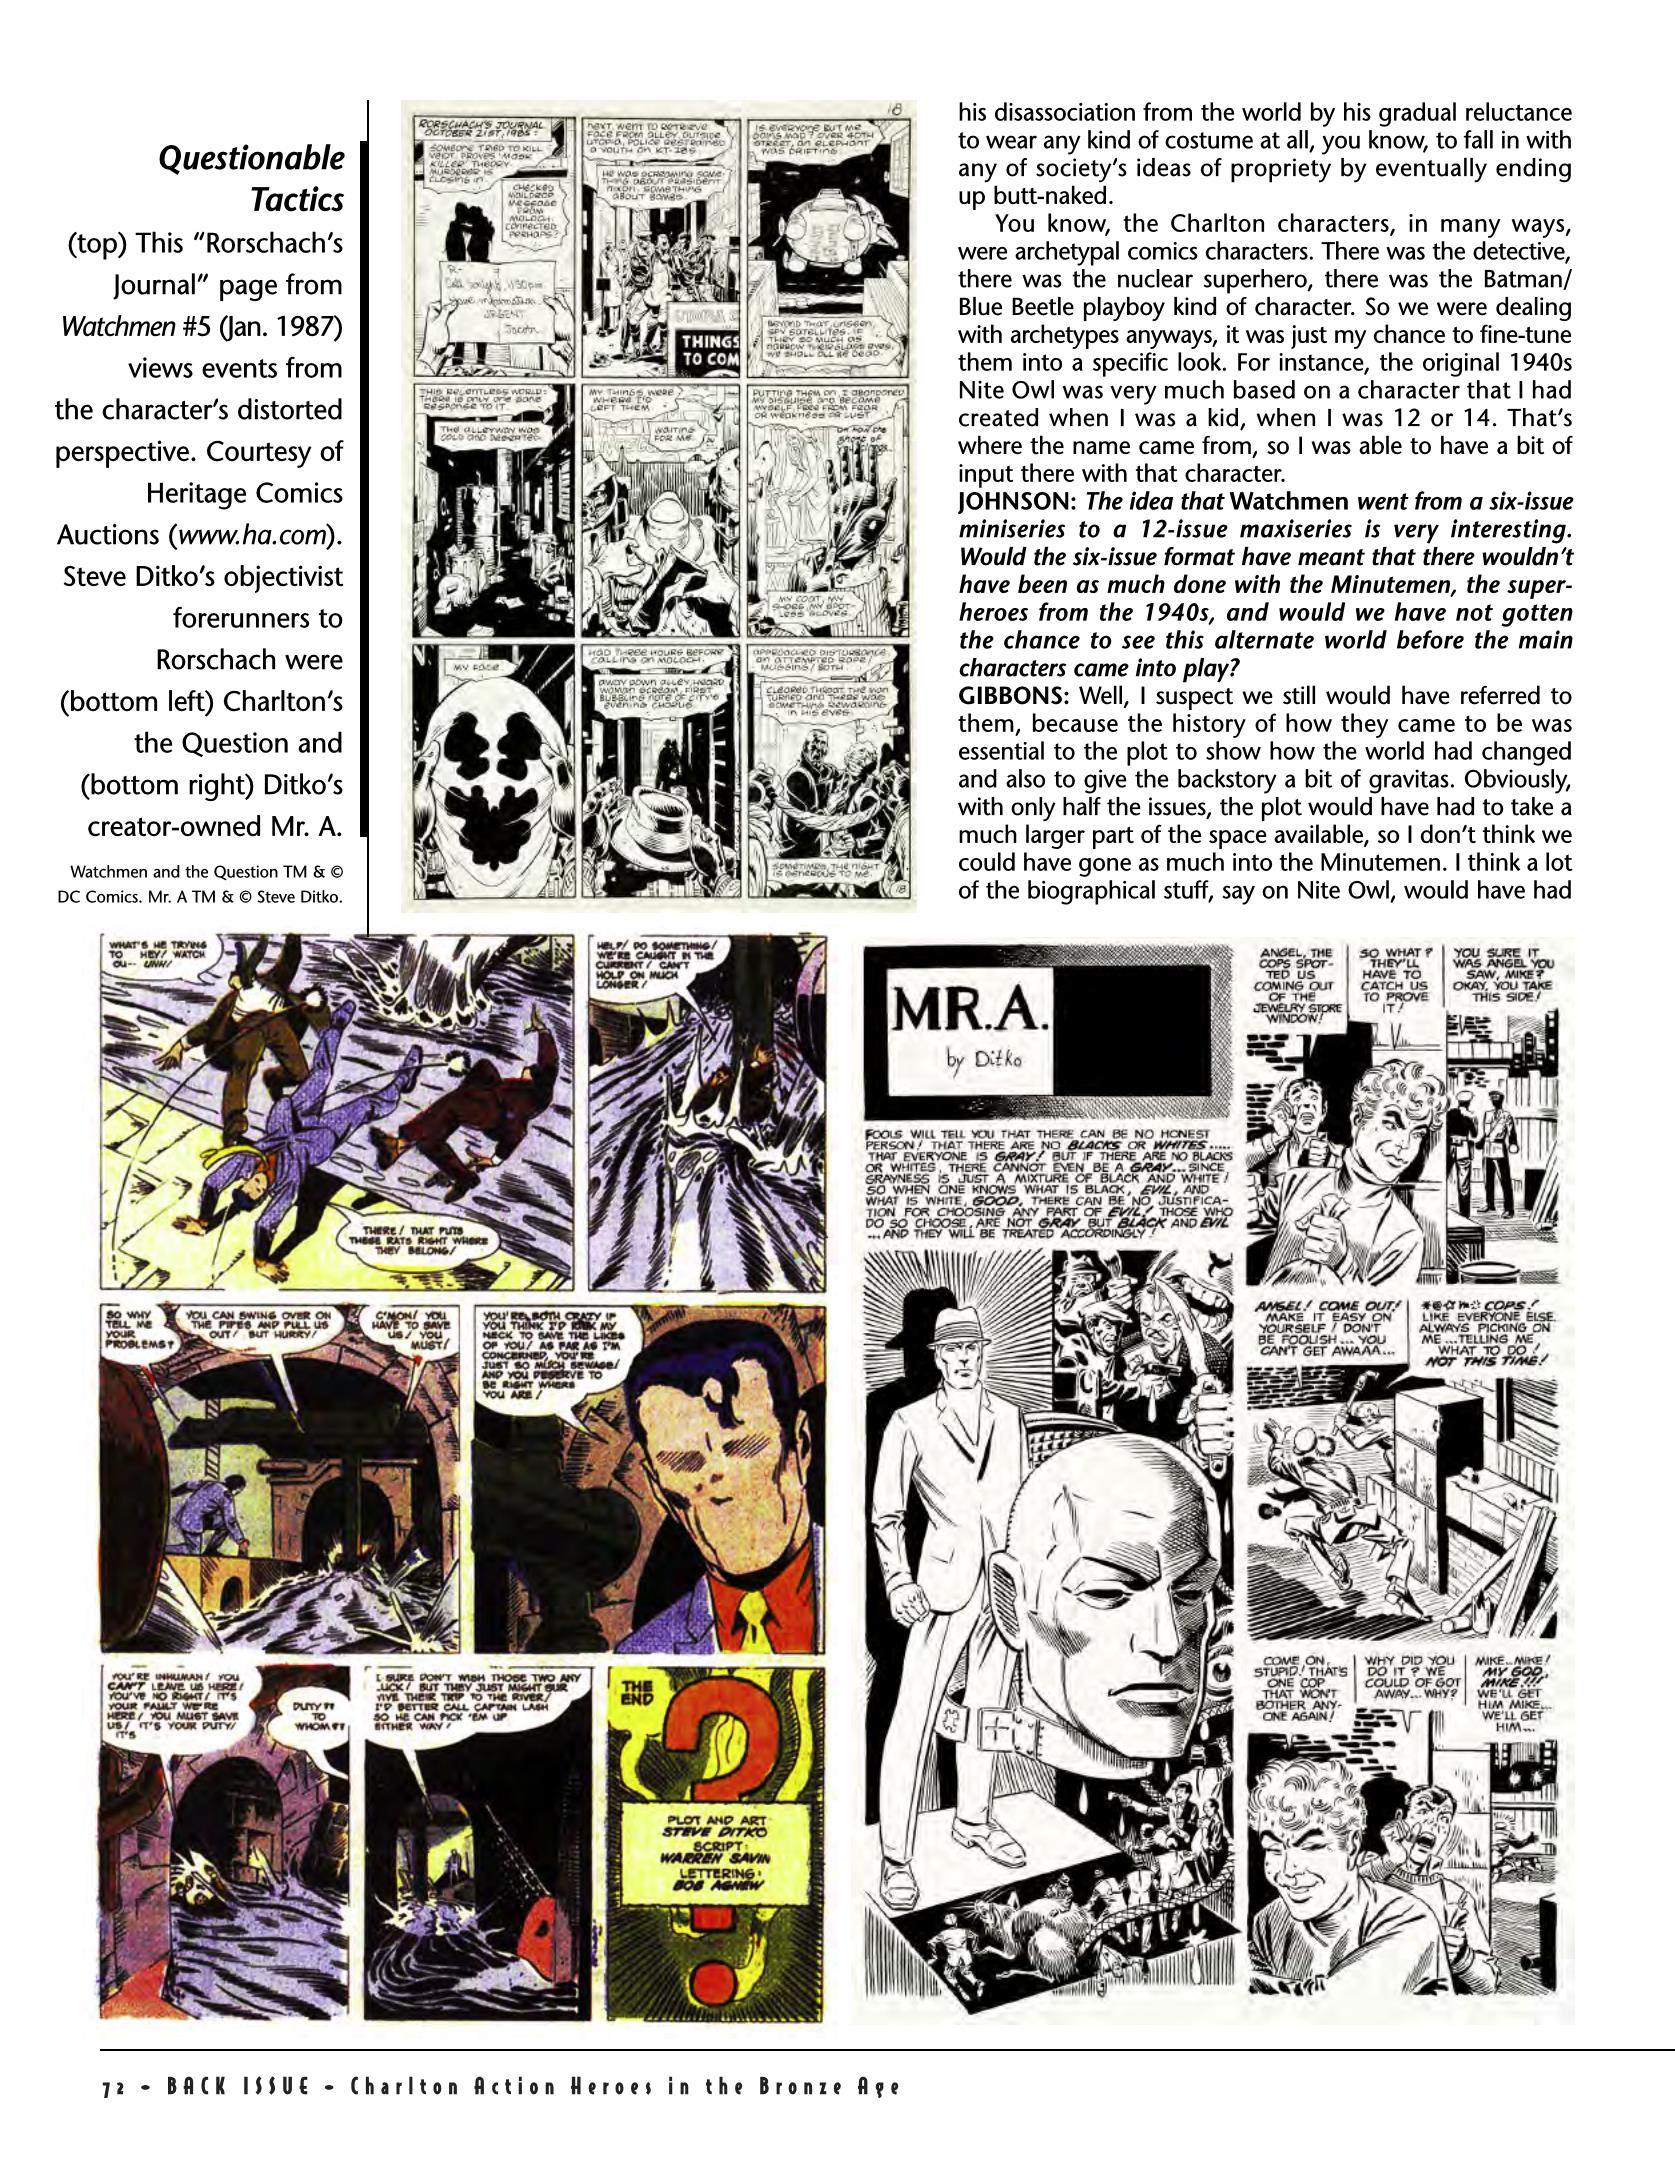 Read online Back Issue comic -  Issue #79 - 74